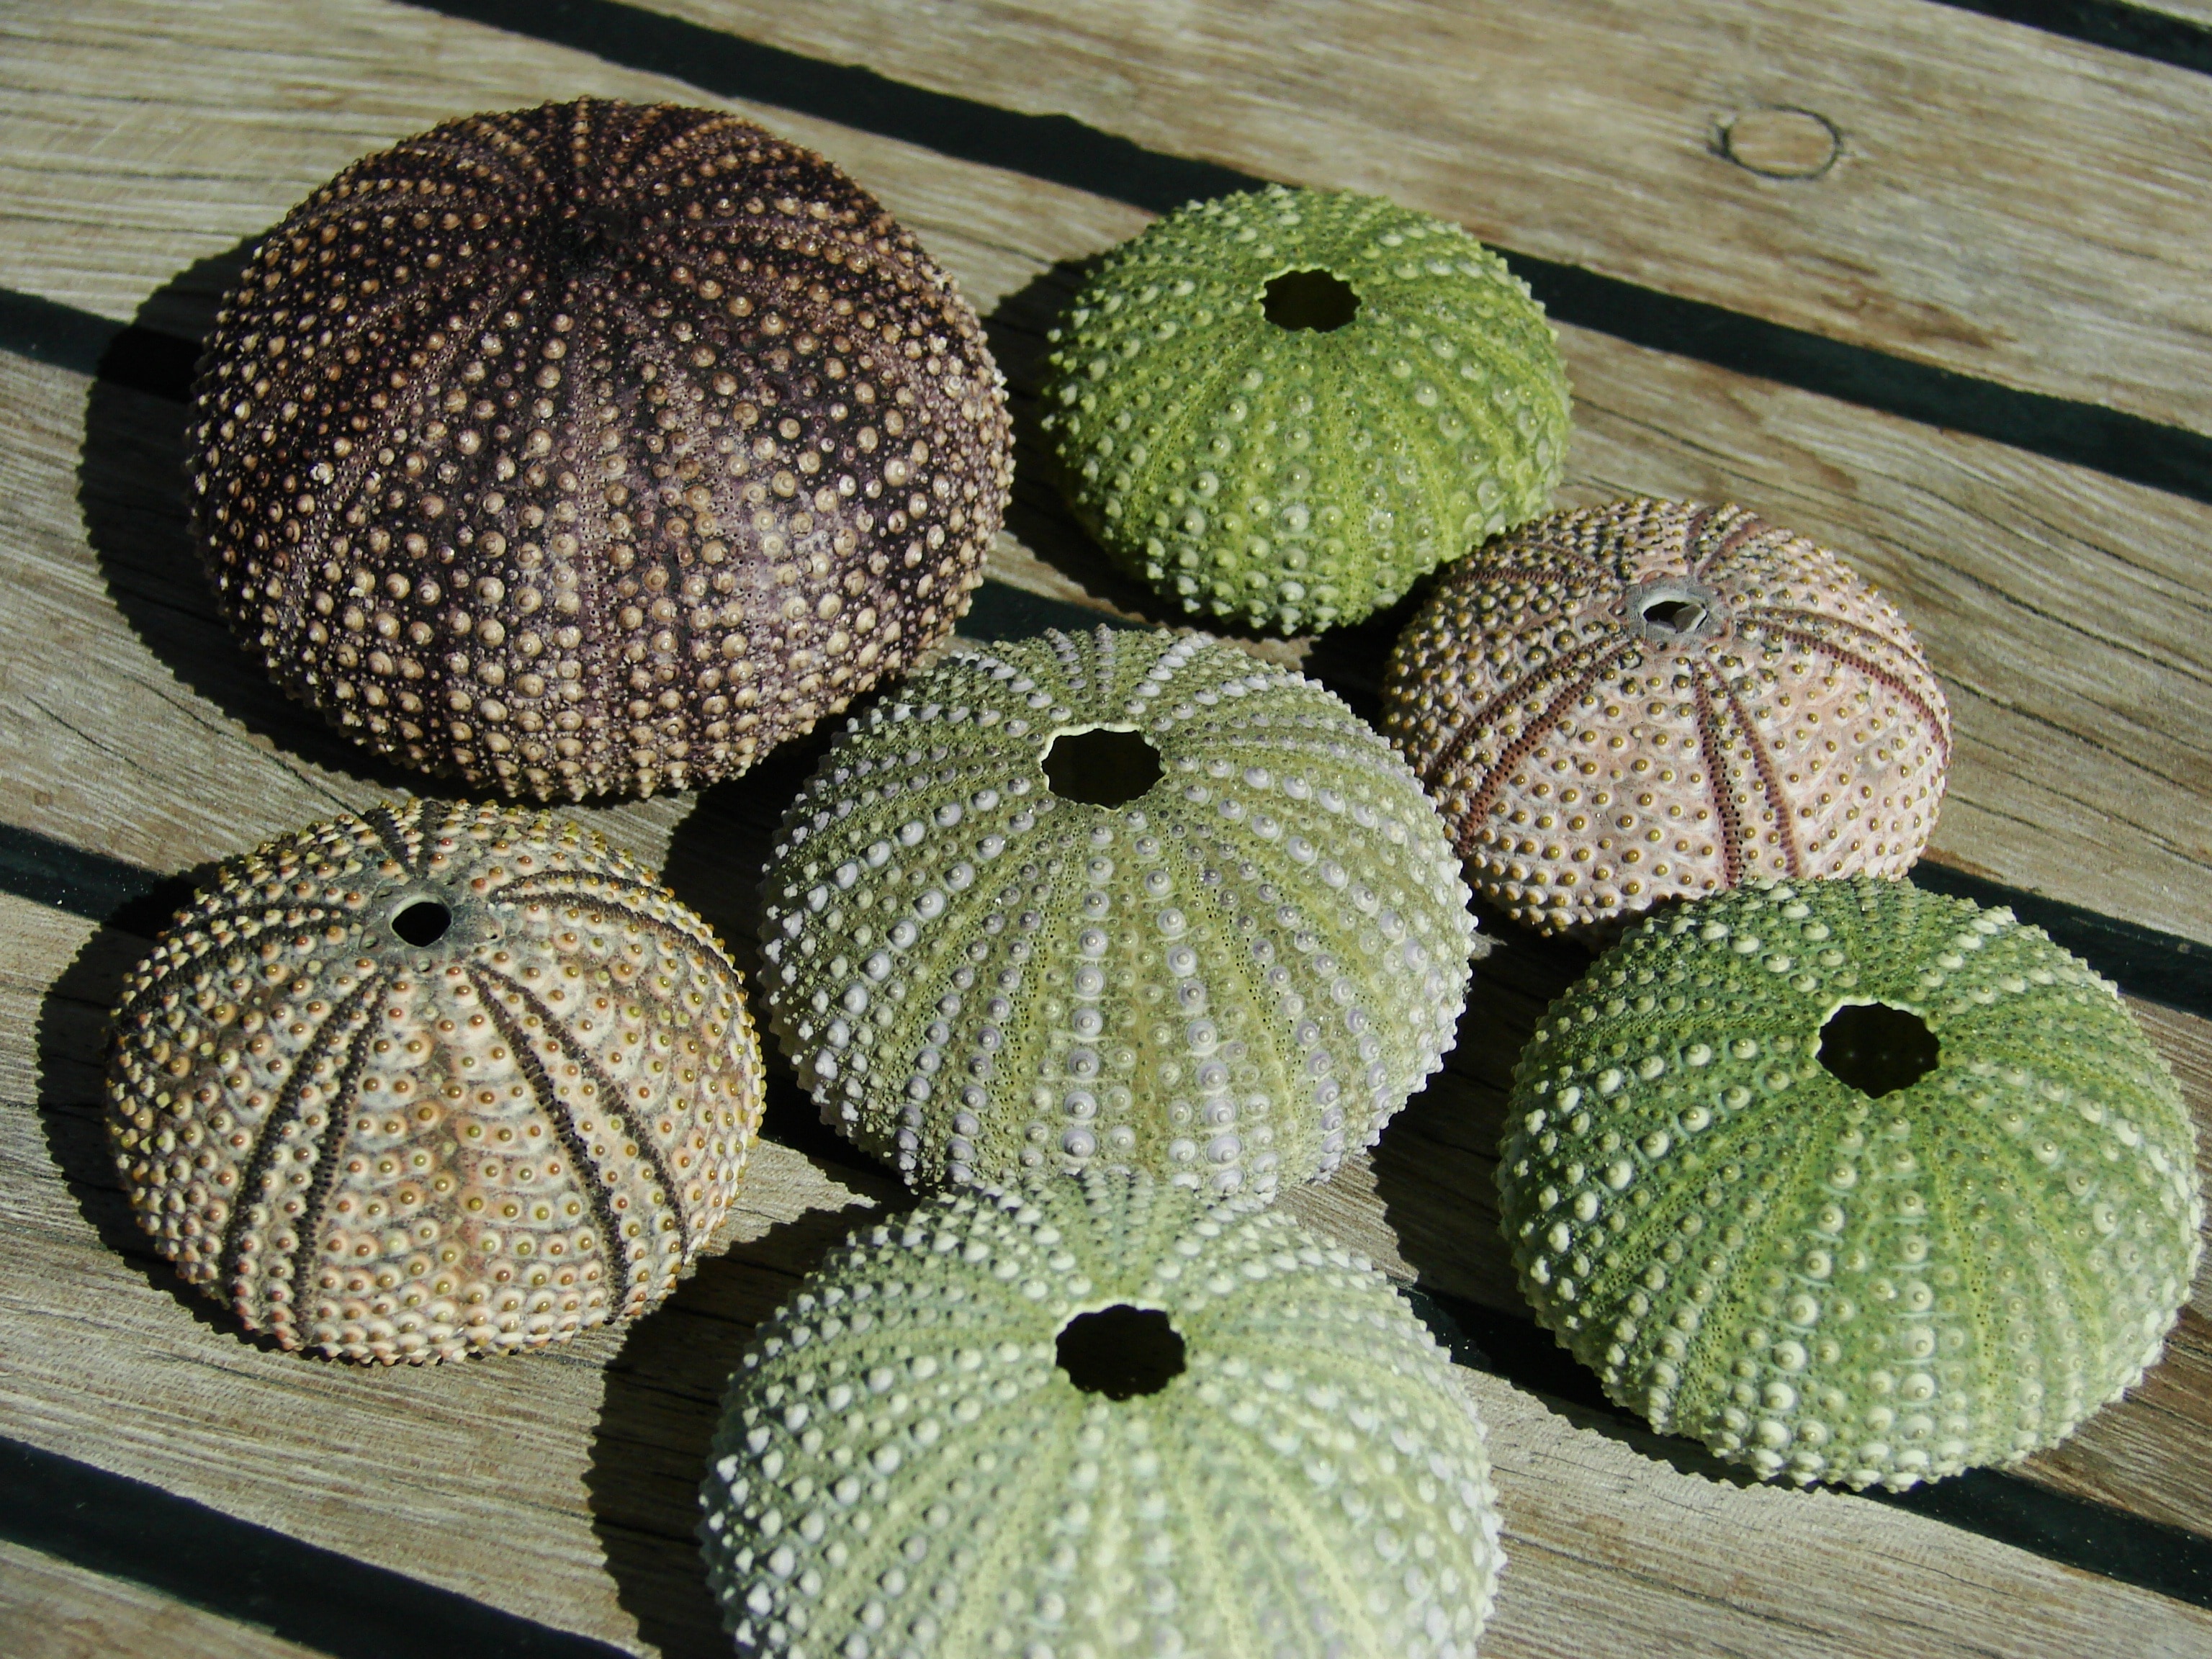 round green and brown ornaments on brown wooden board during daytime